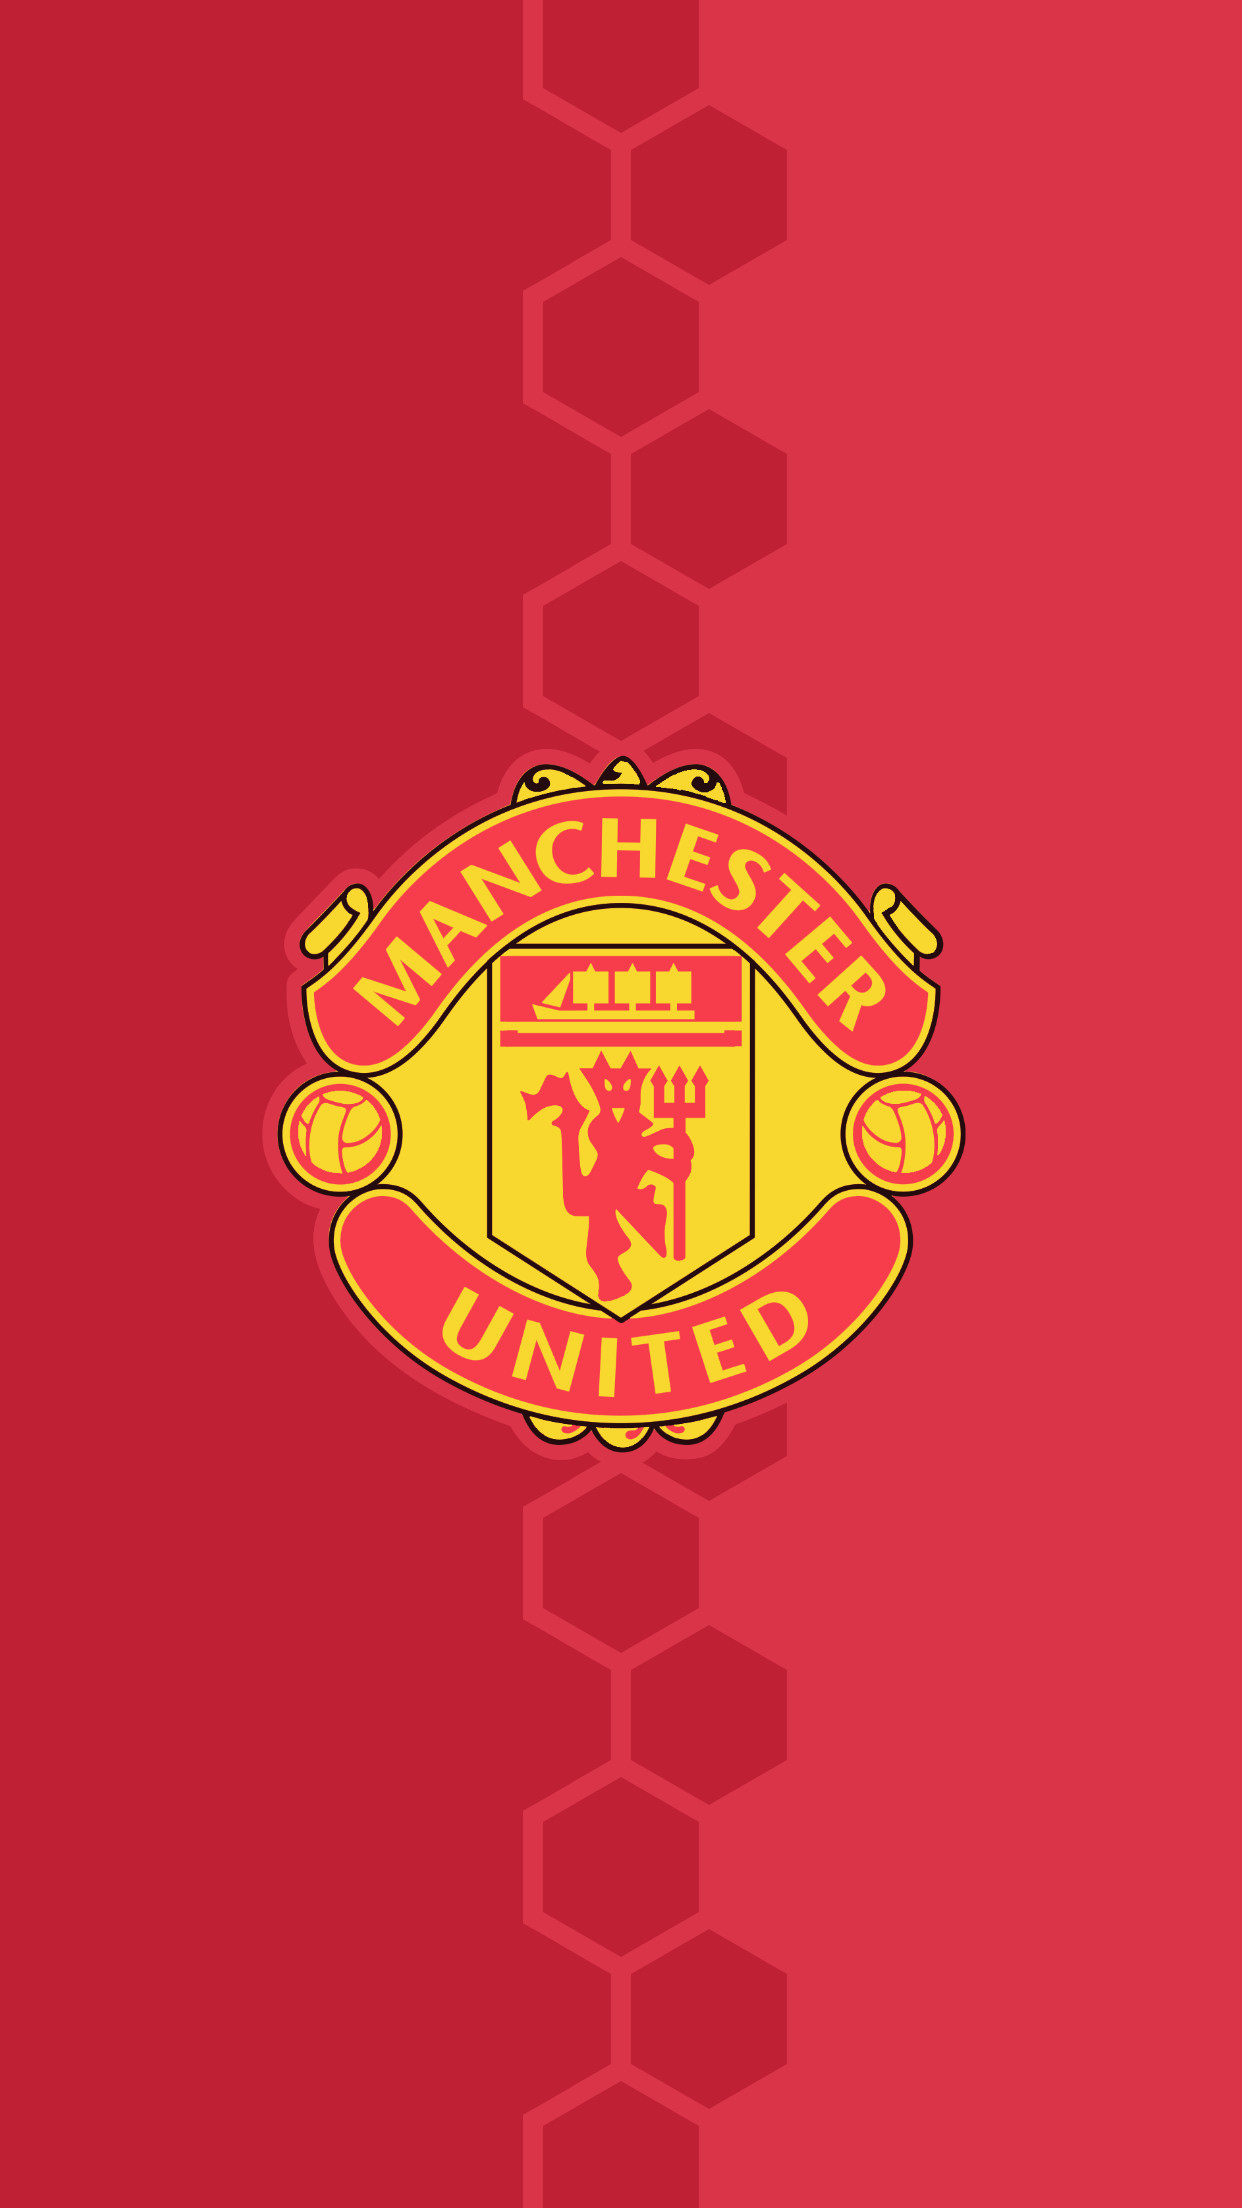 Manchester United HD Wallpaper Image